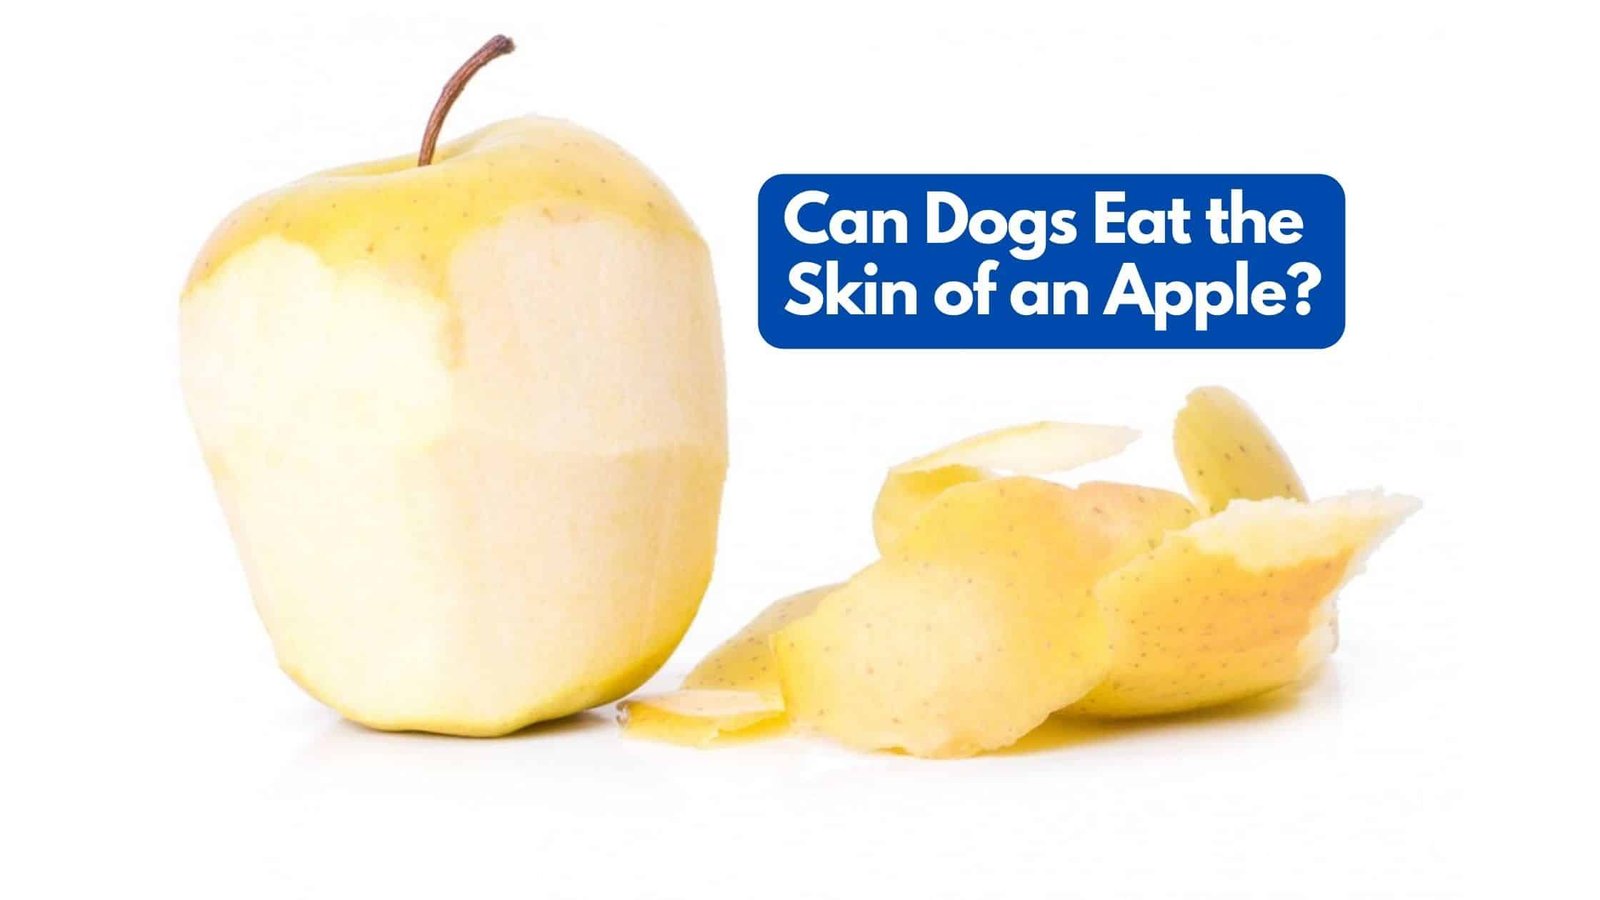 Can dogs eat the skin of an apple